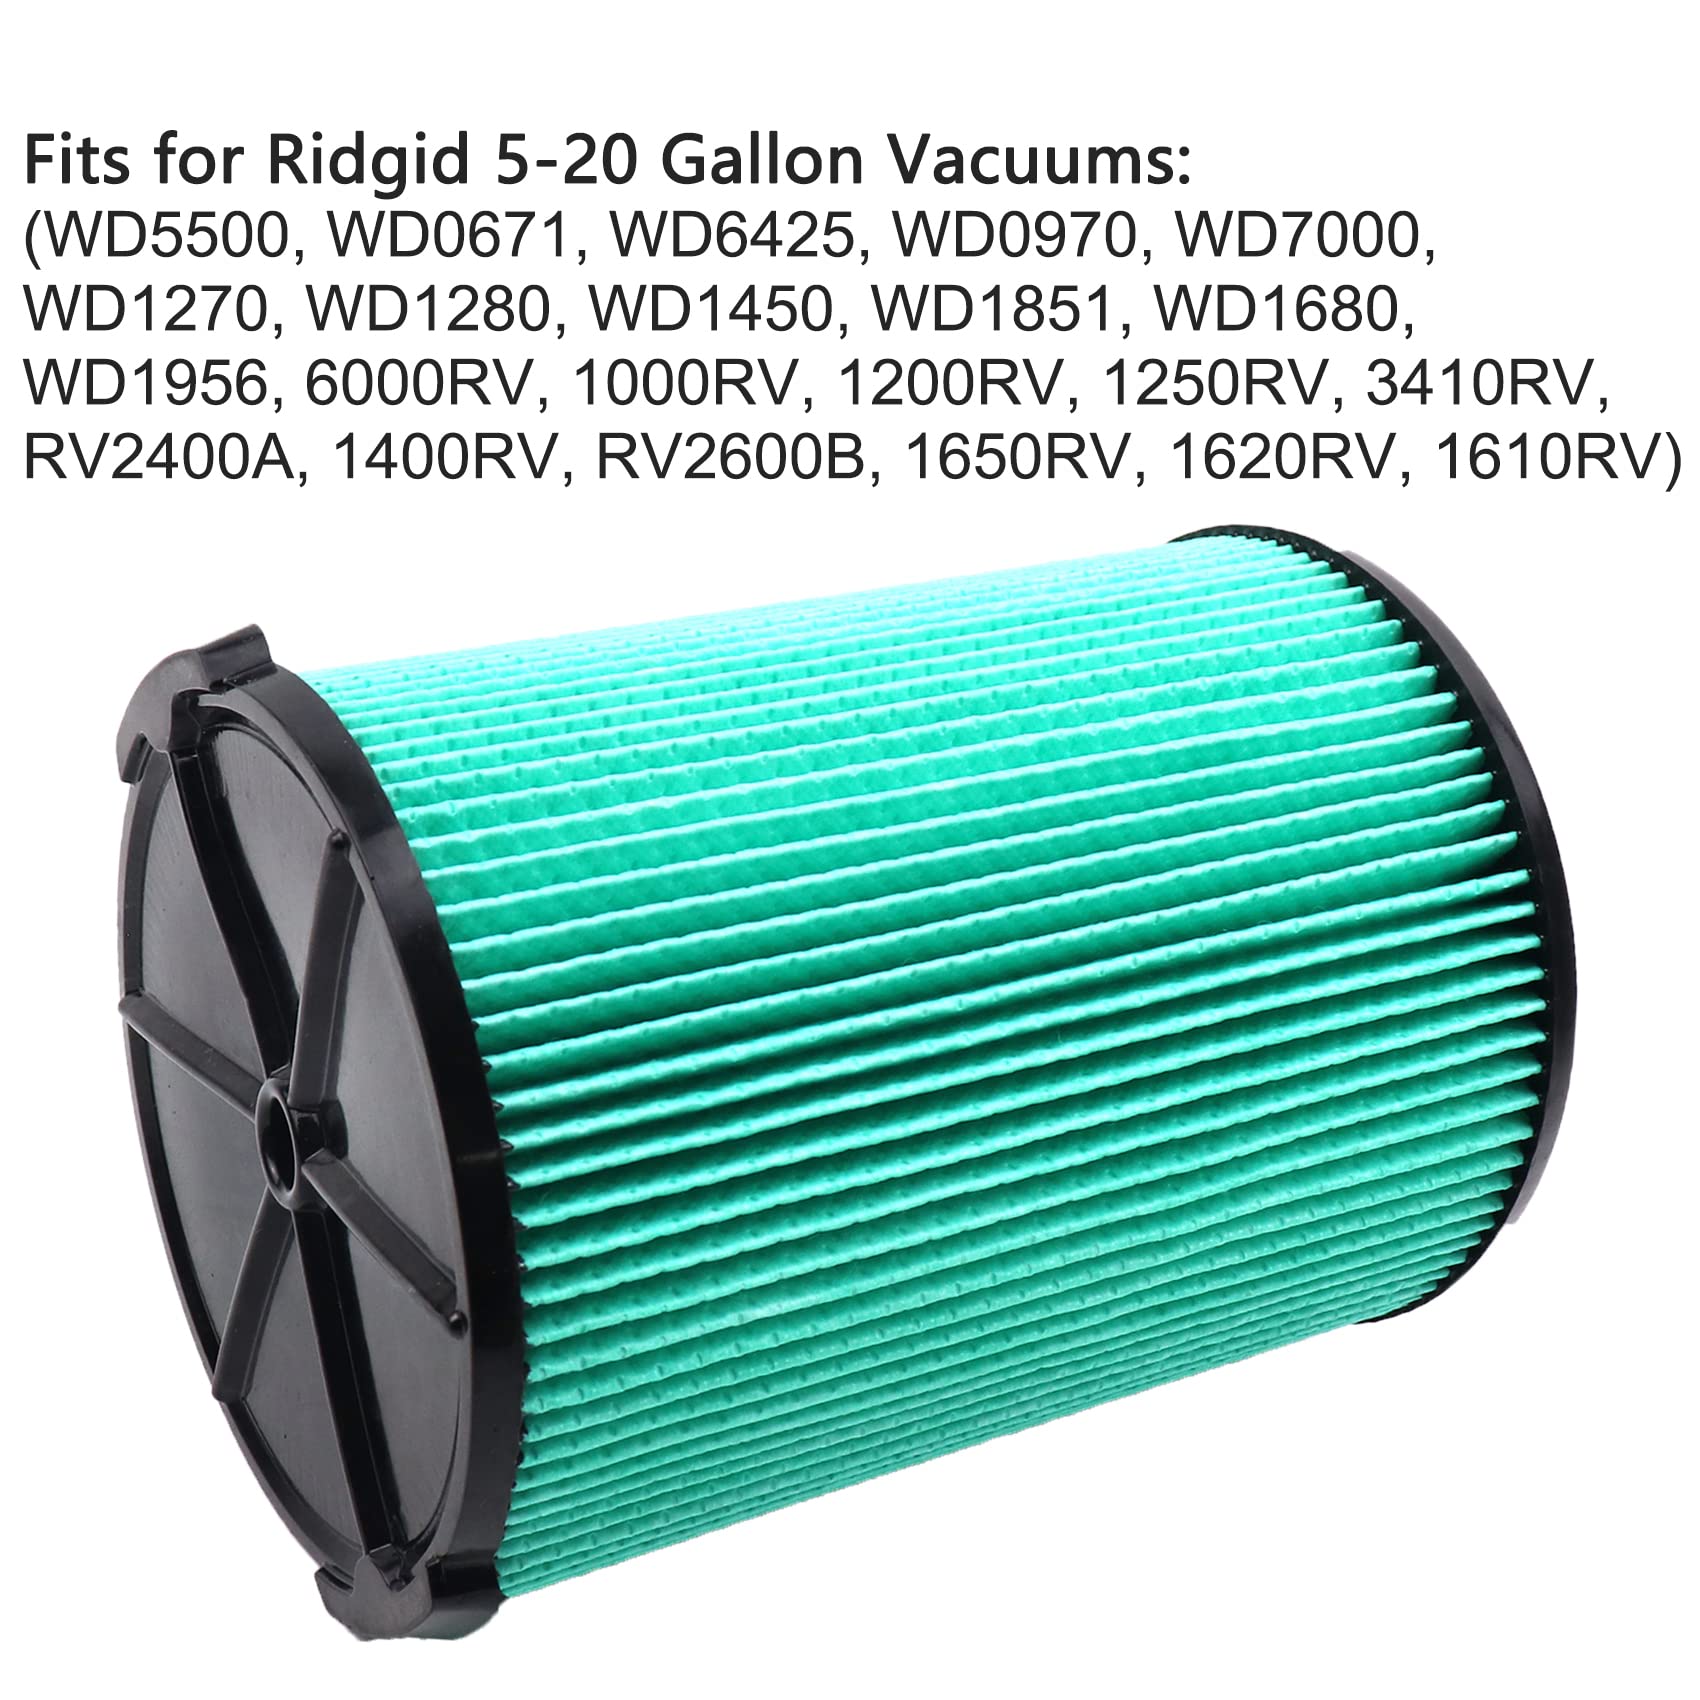 2 Pack VF6000 5-Layer Replacement Filter for Ridgid 5-20 Gallon Wet Dry Vacuums WD5500 WD0671 WD6425 WD7000 WD1280 WD1851 WD1680 WD1956 RV2400A 1400RV RV2600B